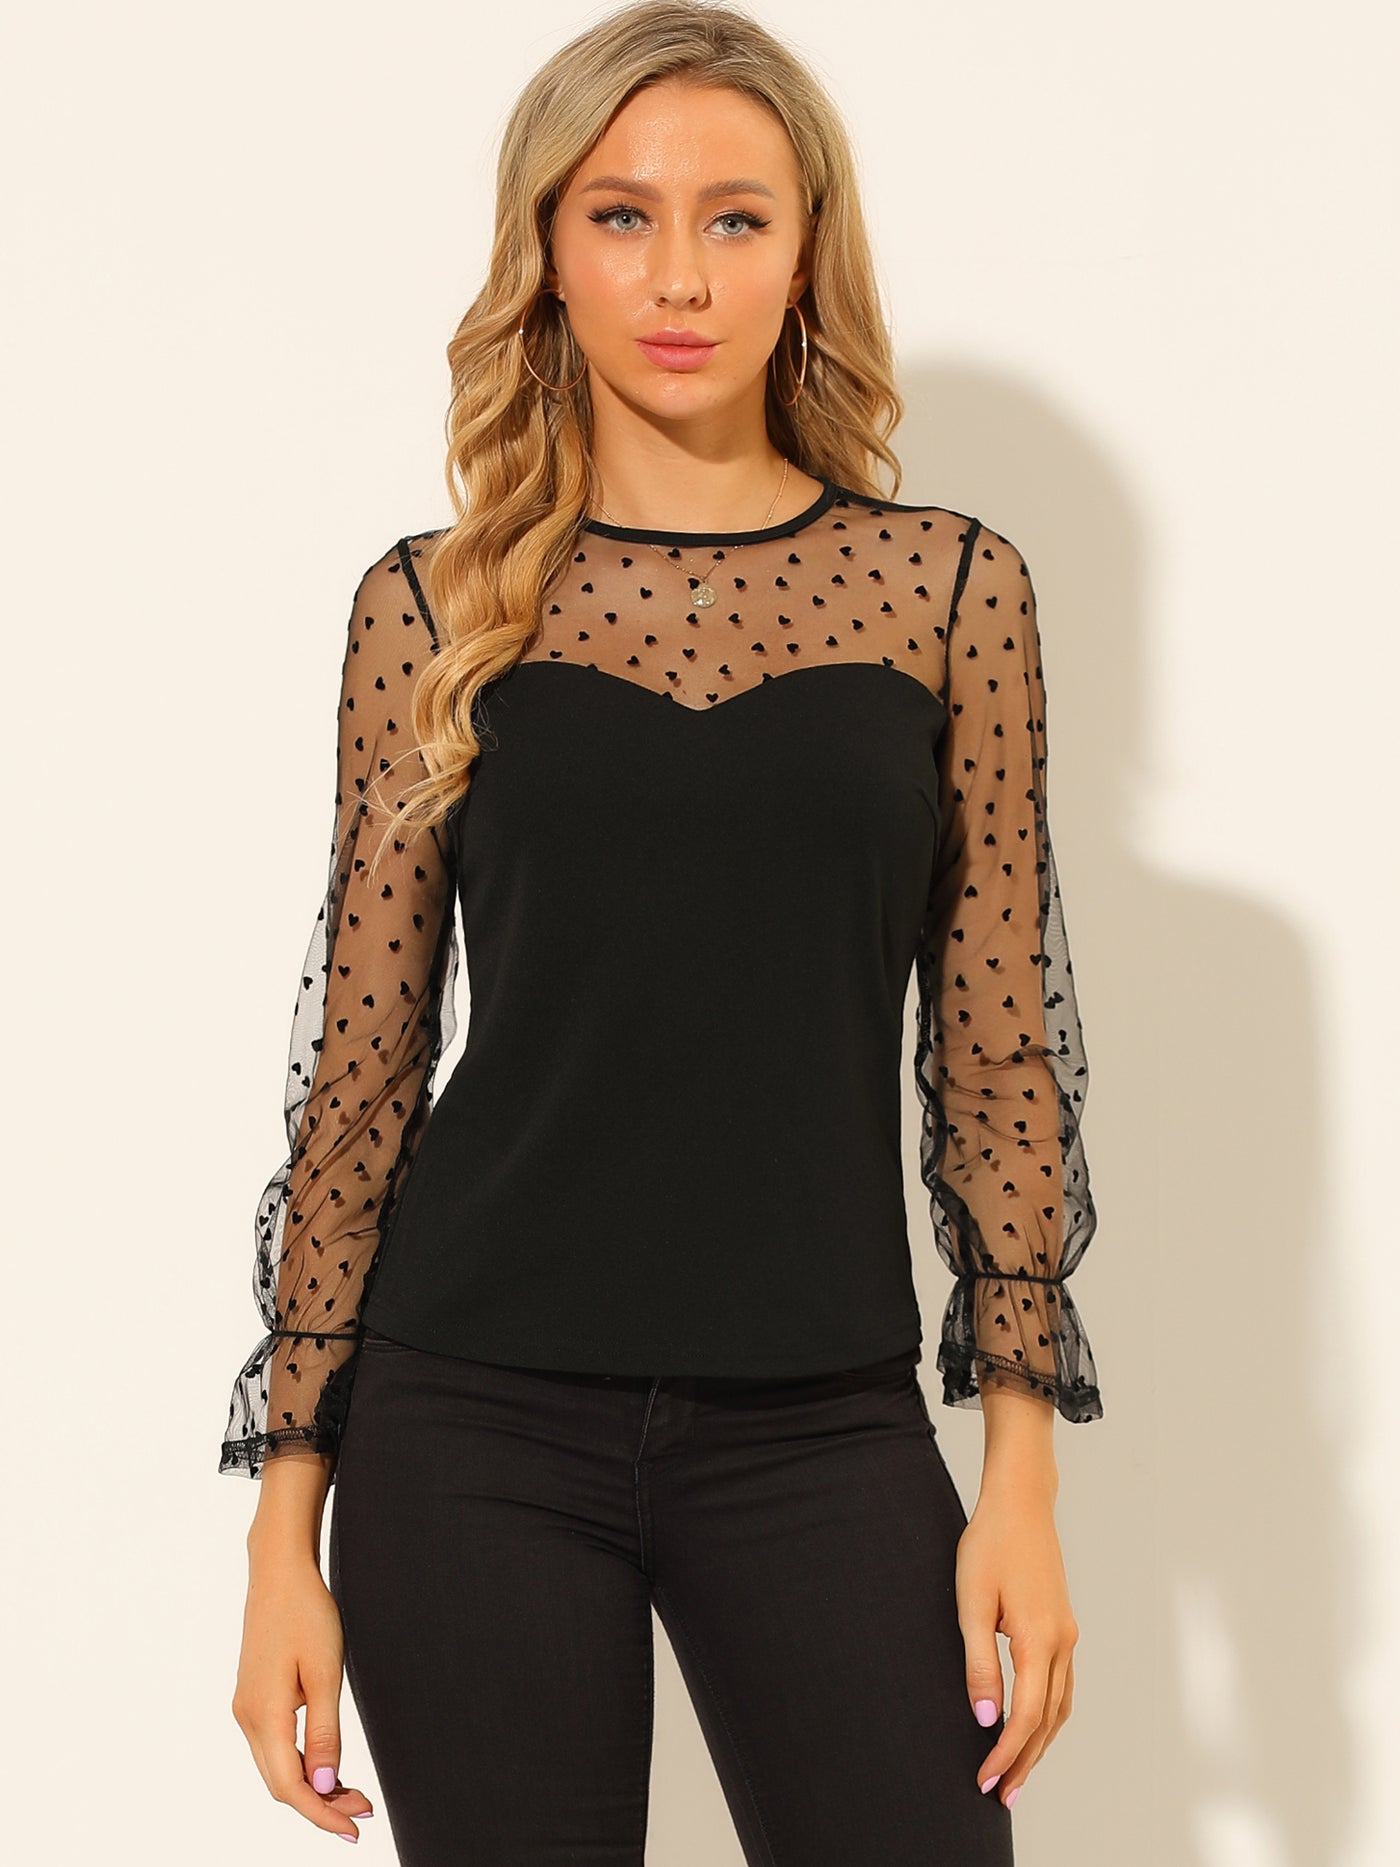 Allegra K Lace Round Neck Heart Dots Sheer Blouse Long Mesh Sleeve Top